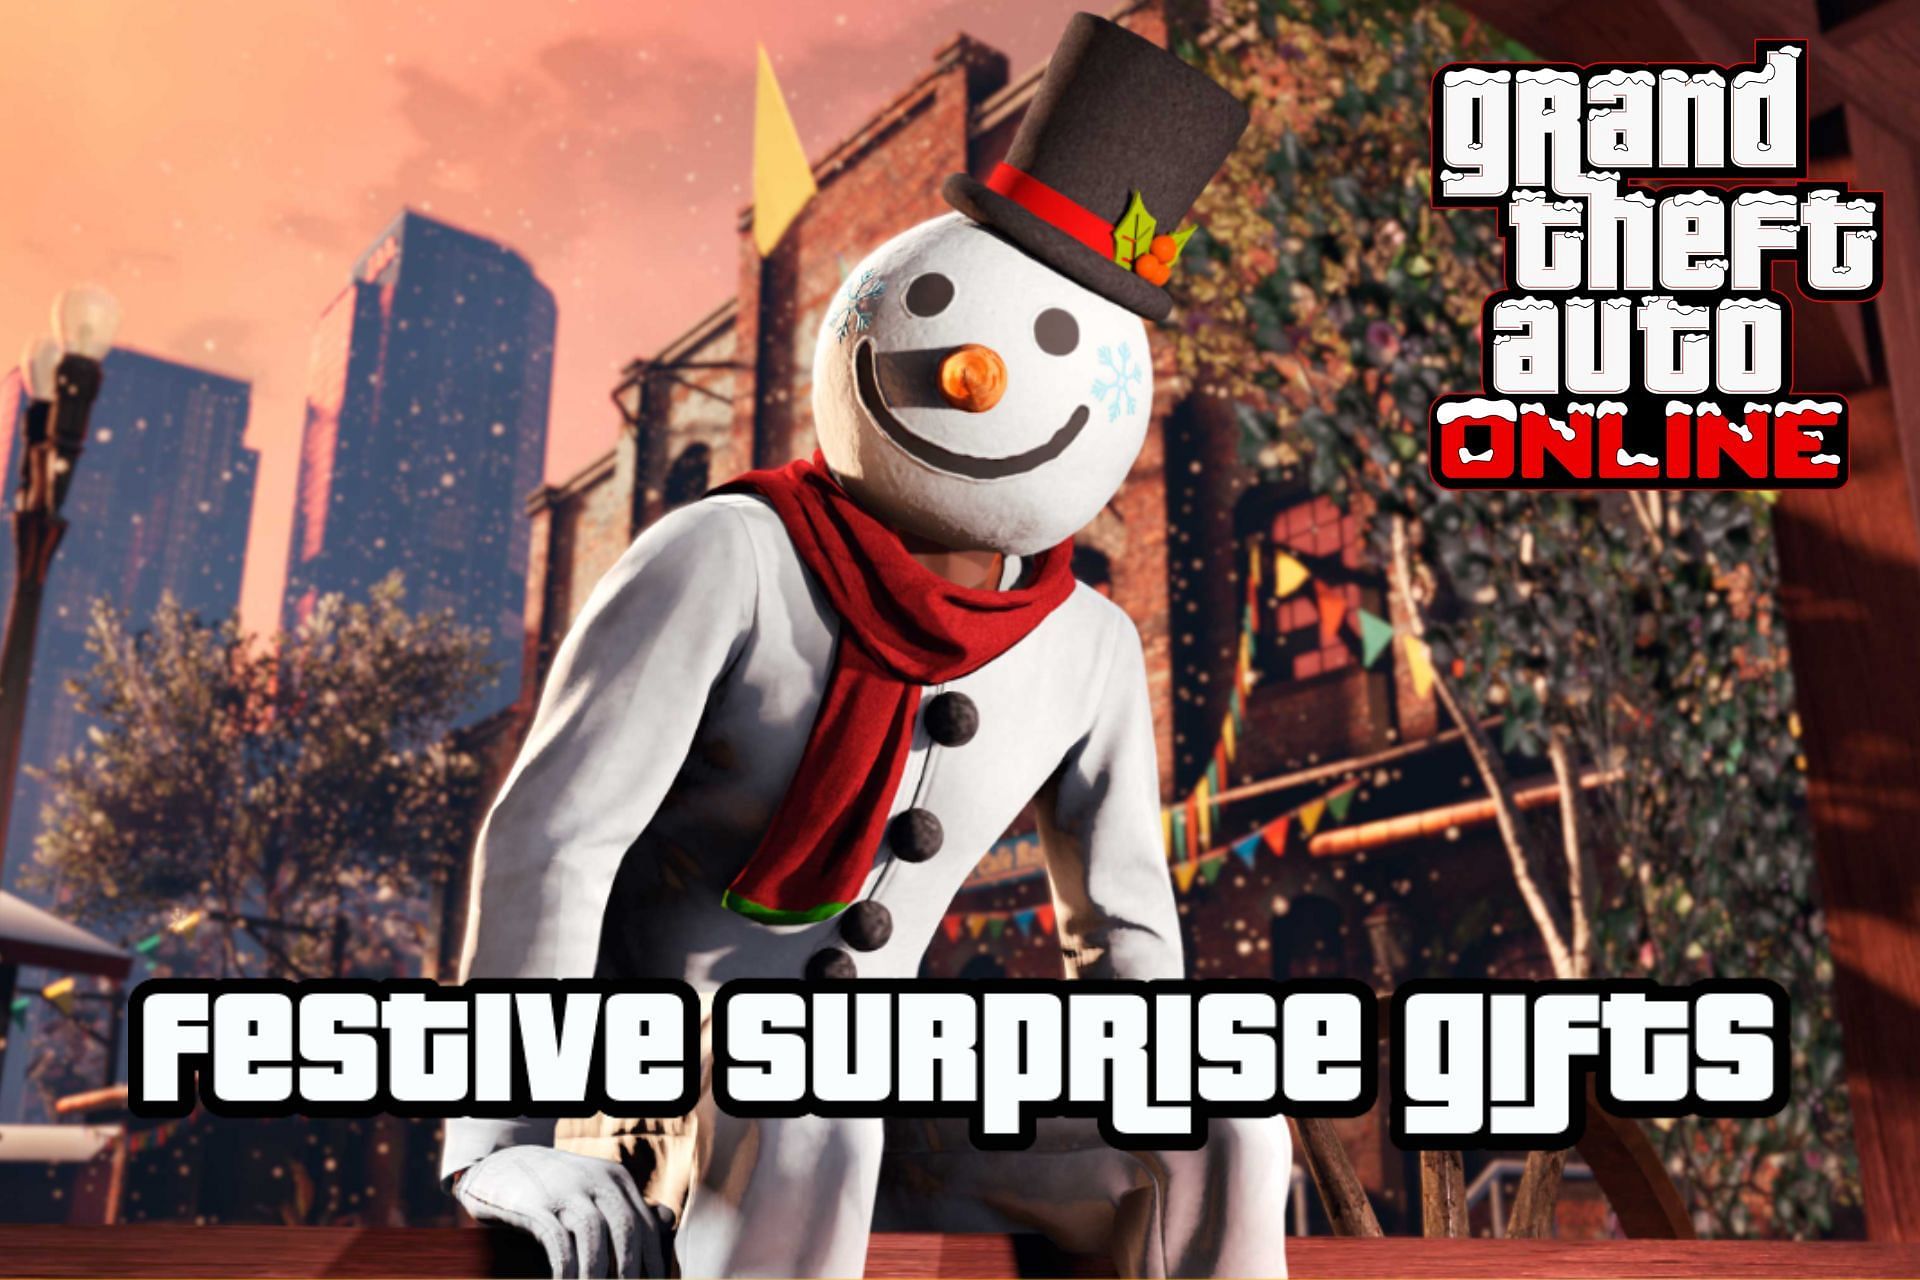 Rockstar Games has released festive surprise gifts in GTA Online for a limited time (Image via Rockstar Games)